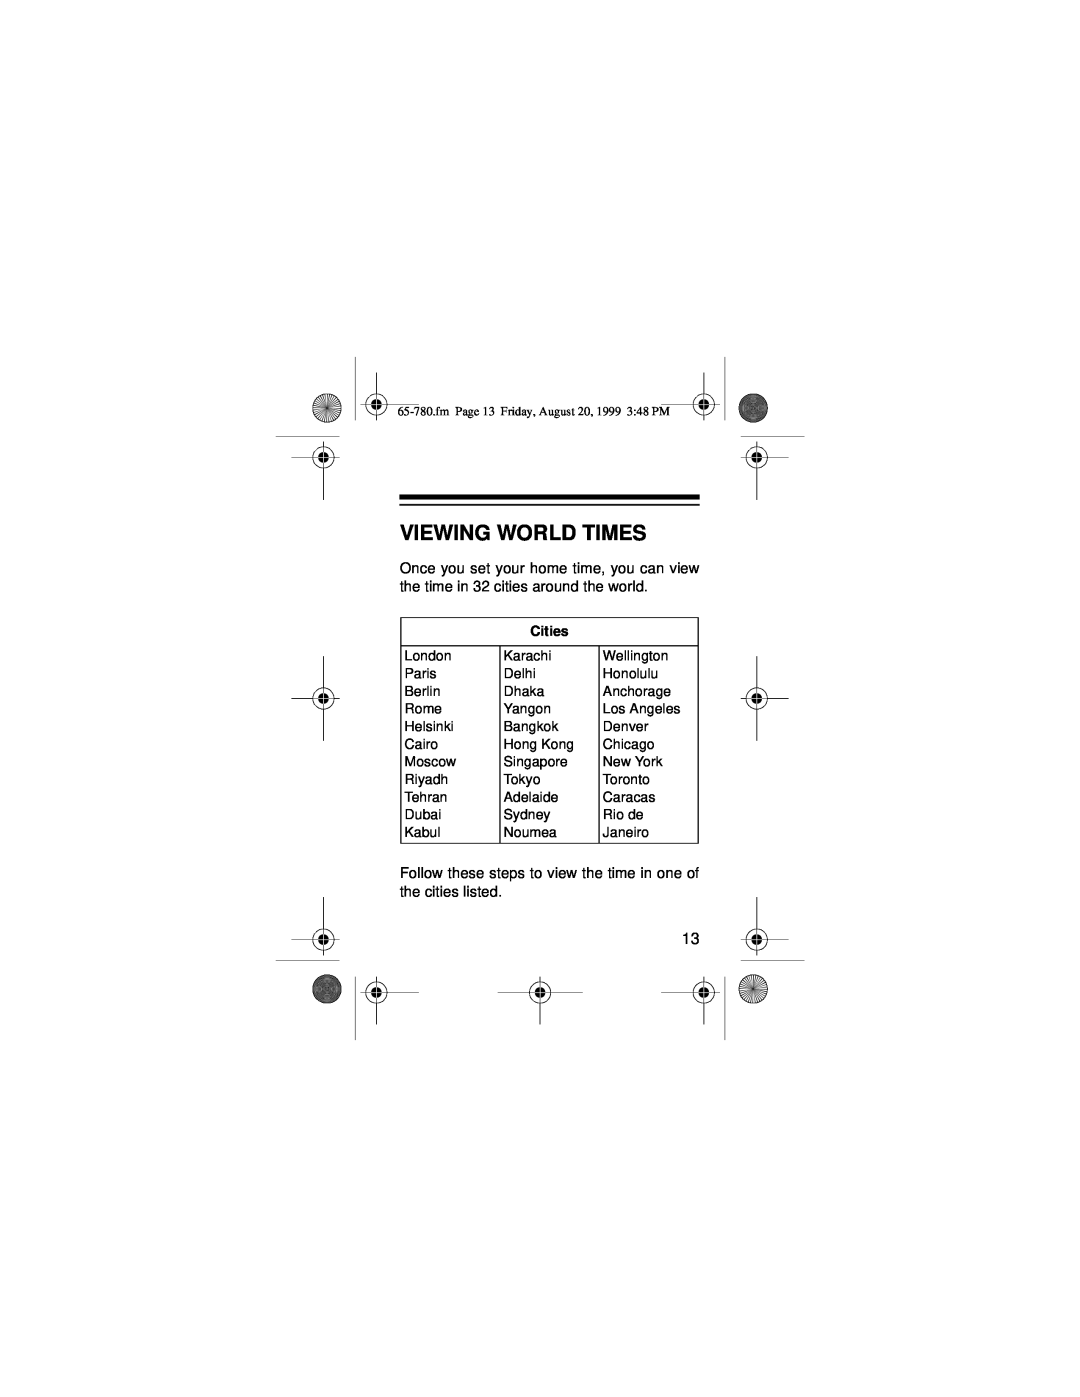 Samsung 256K owner manual Viewing World Times, Cities 